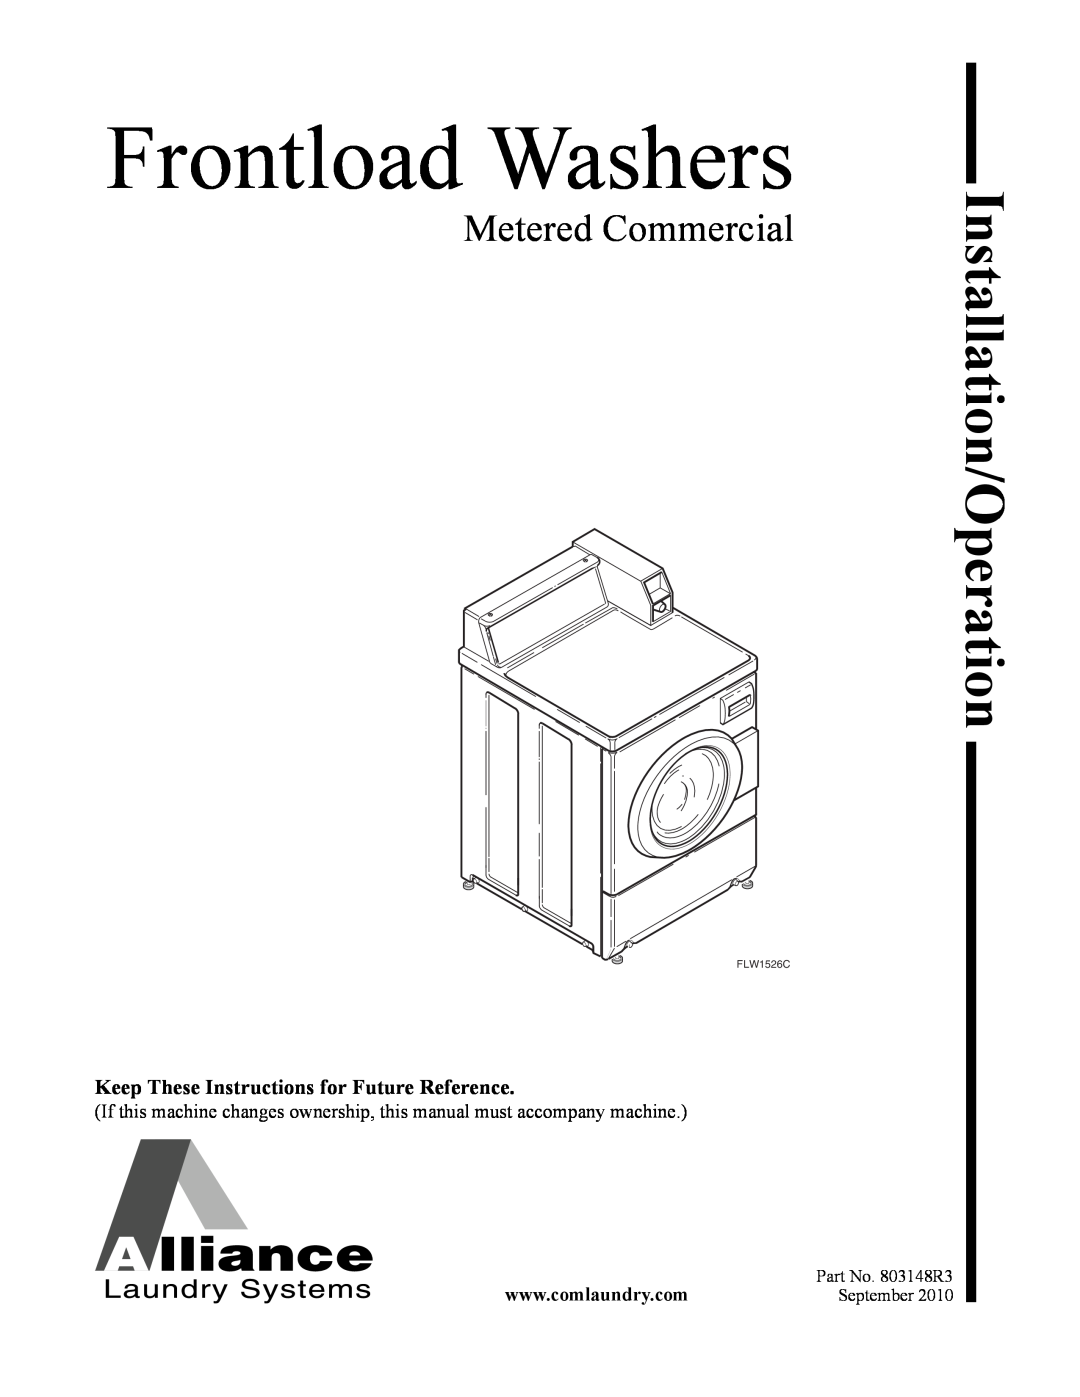 Alliance Laundry Systems FLW1526C manual Frontload Washers, Metered Commercial, Installation/Operation 